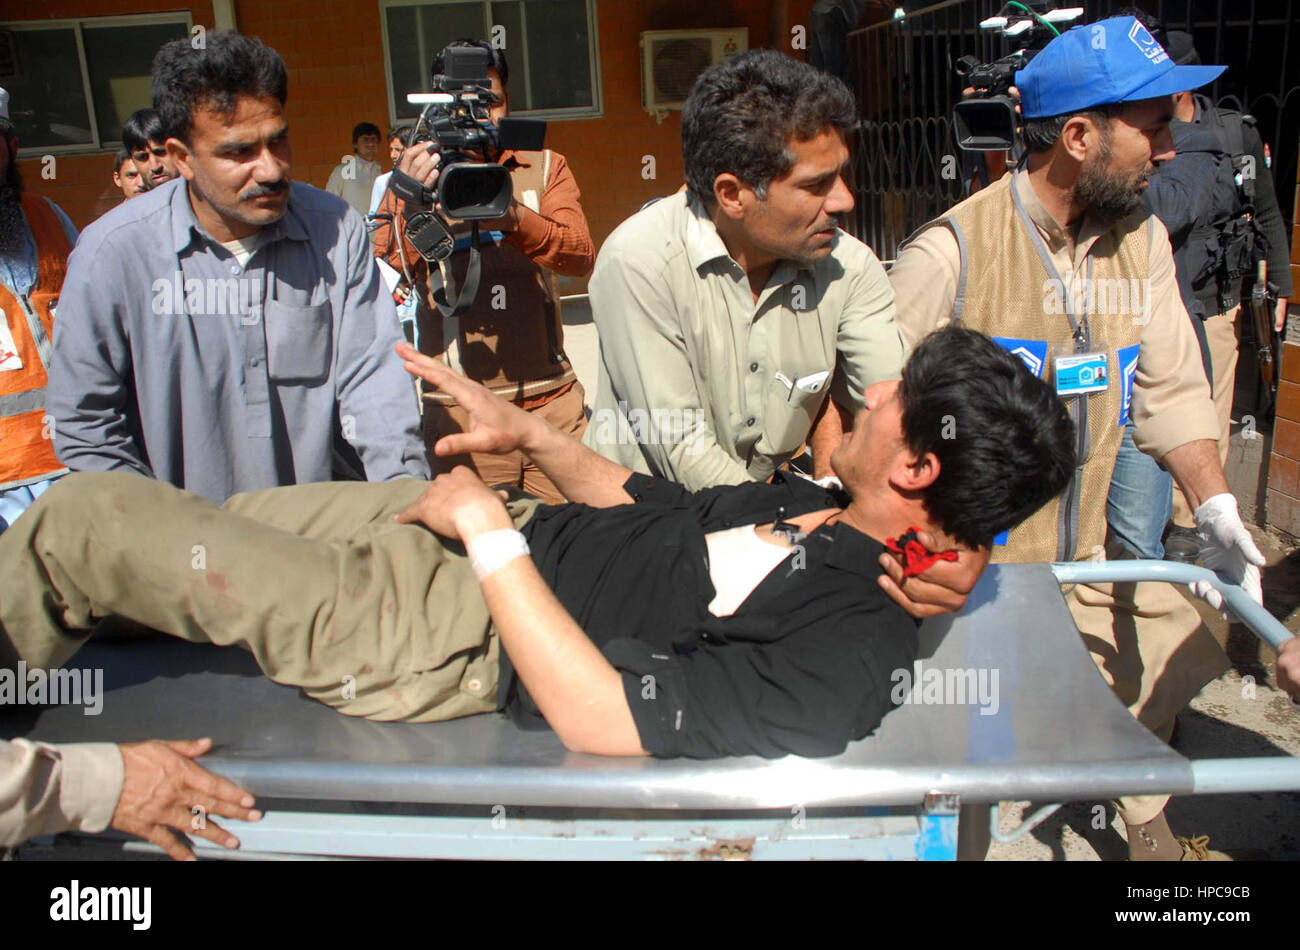 Injured victims of suicide bomb explosions that occurred at a local court building in Charsadda, being shifting for treatment to Lady Reading Hospital in Peshawar on Tuesday, February 21, 2017. Security forces killed three suicide attackers who attempted to wreak havoc at a local court in Charsadda district. Six people, including four policemen, were martyred and 20 others were injured. Stock Photo